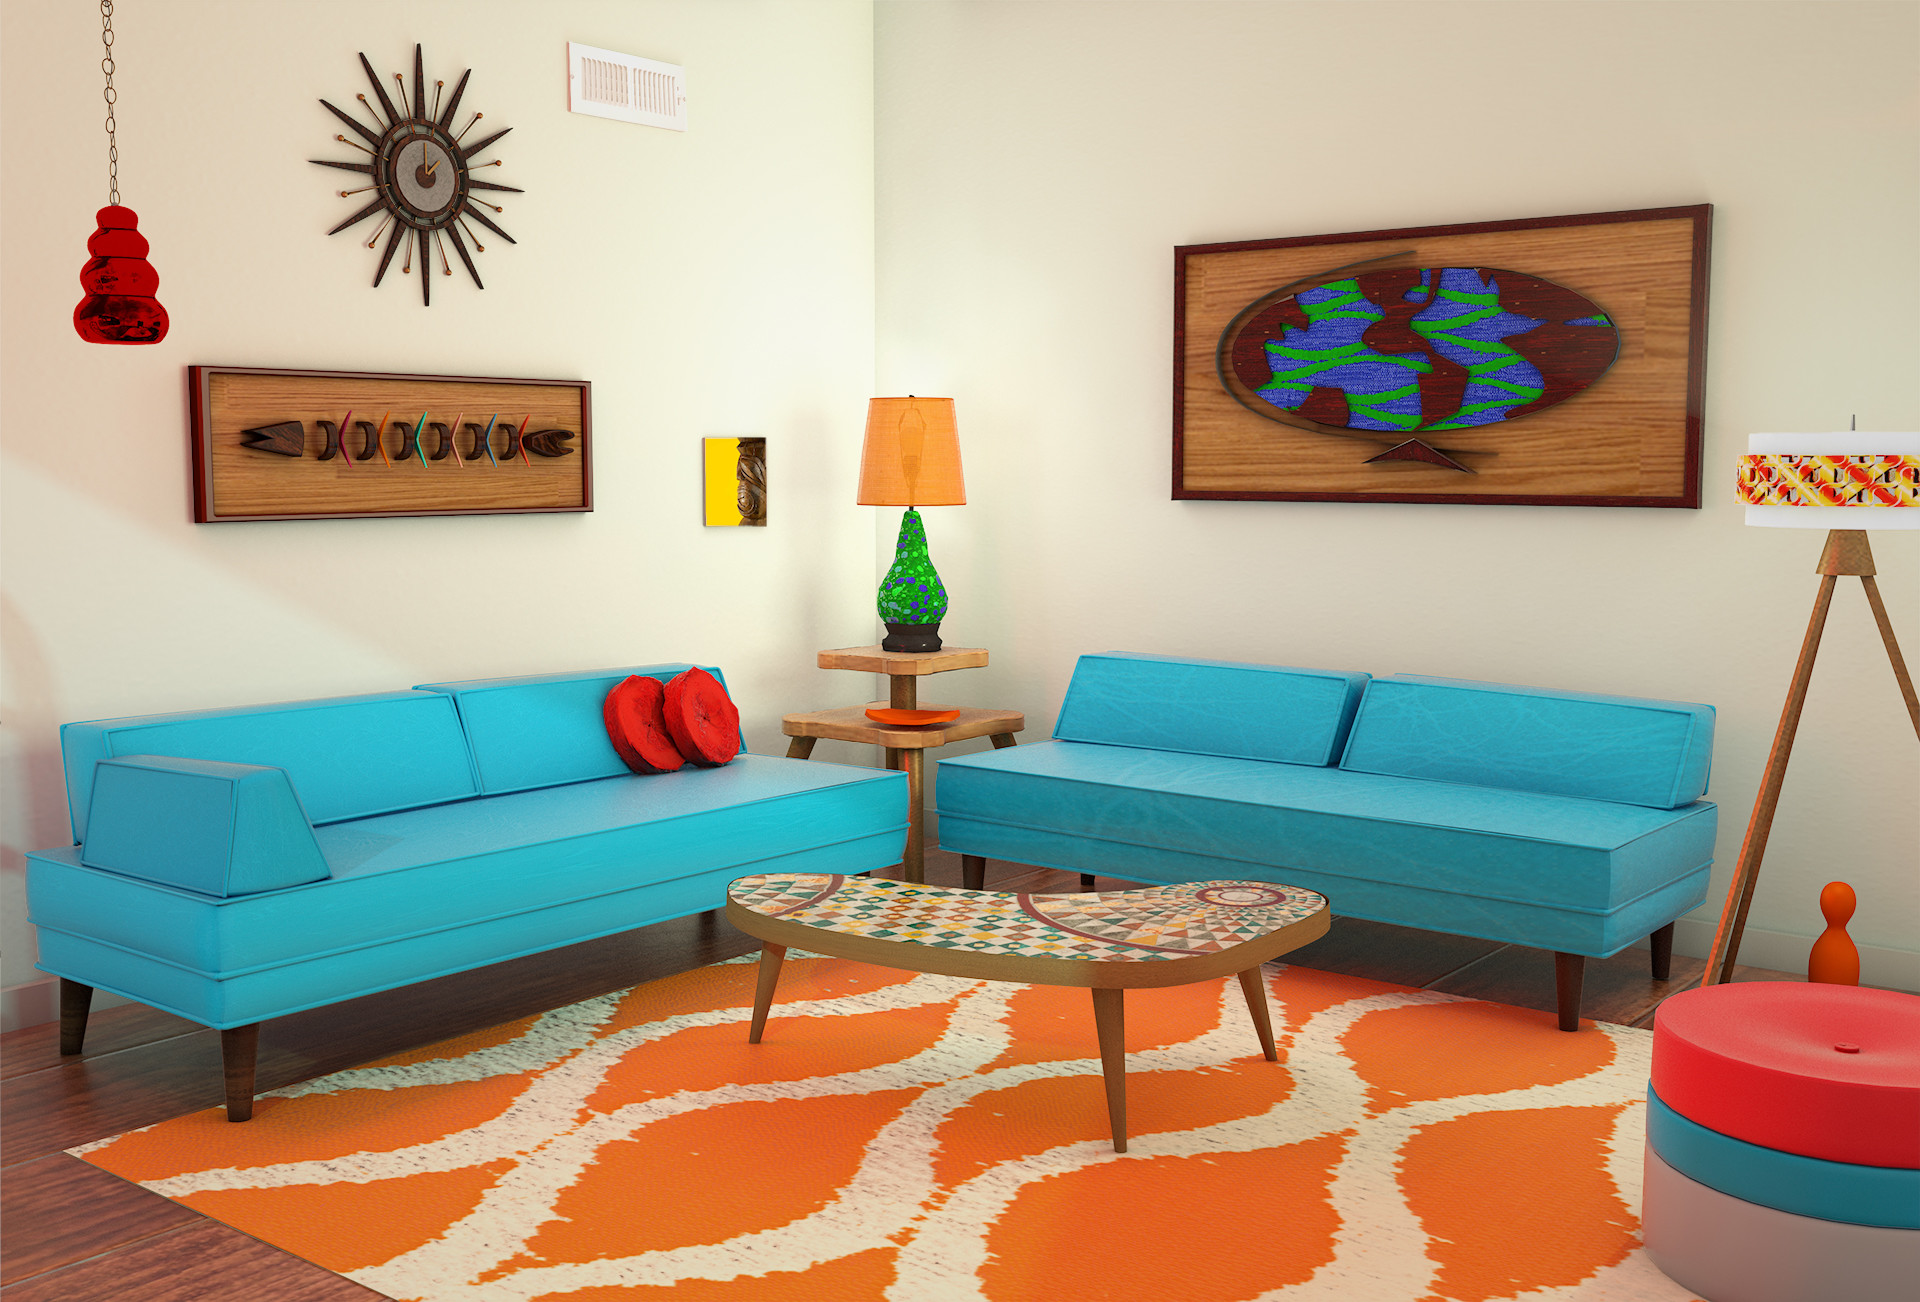 That 70's Show Living Room